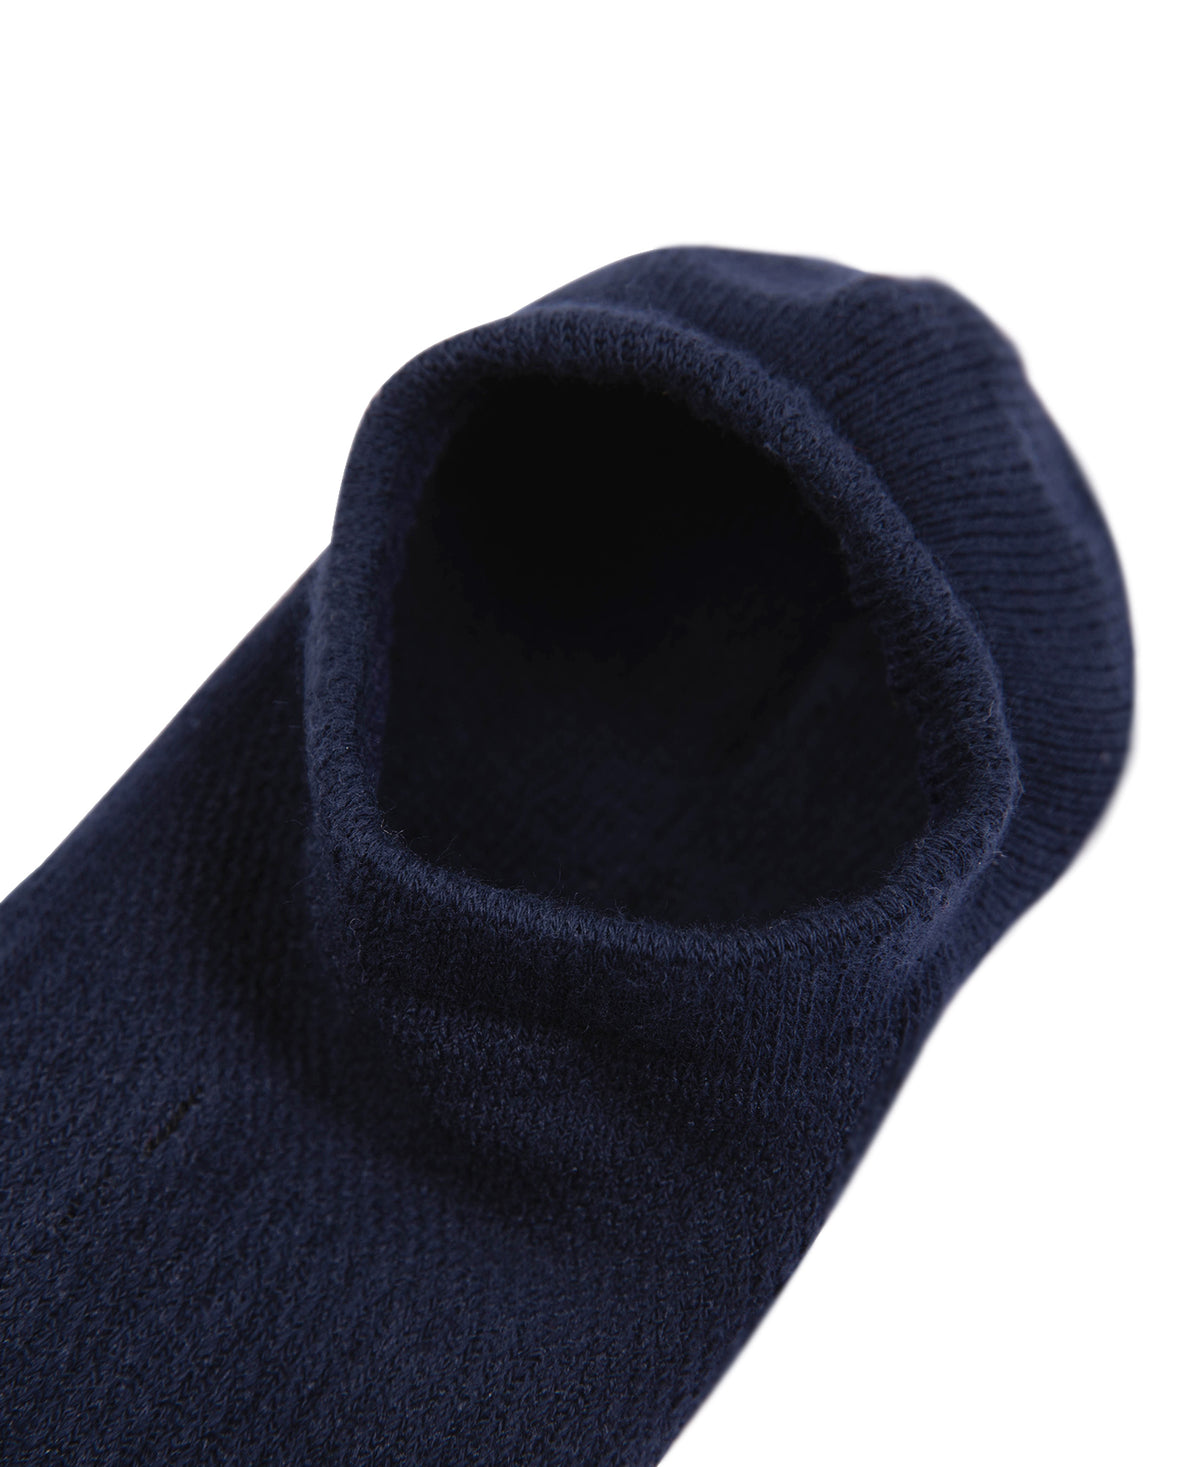 Colored Cotton No Show Socks - Navy